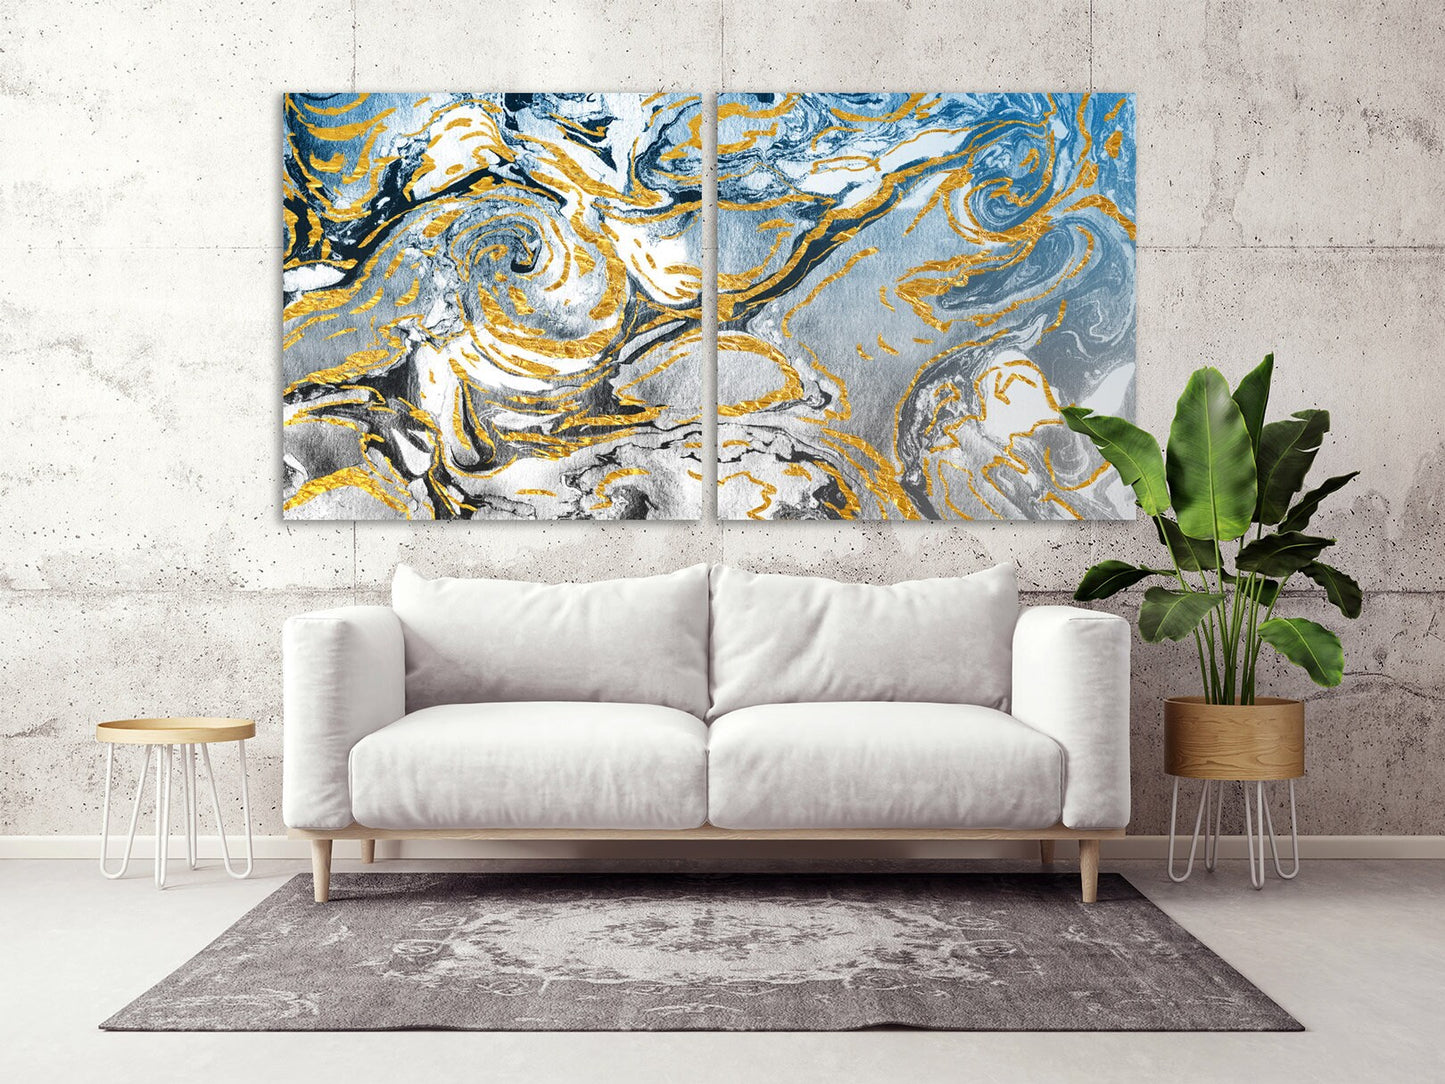 Modern abstract extra large printable wall art framed Multi panel pour canvas painting room decor